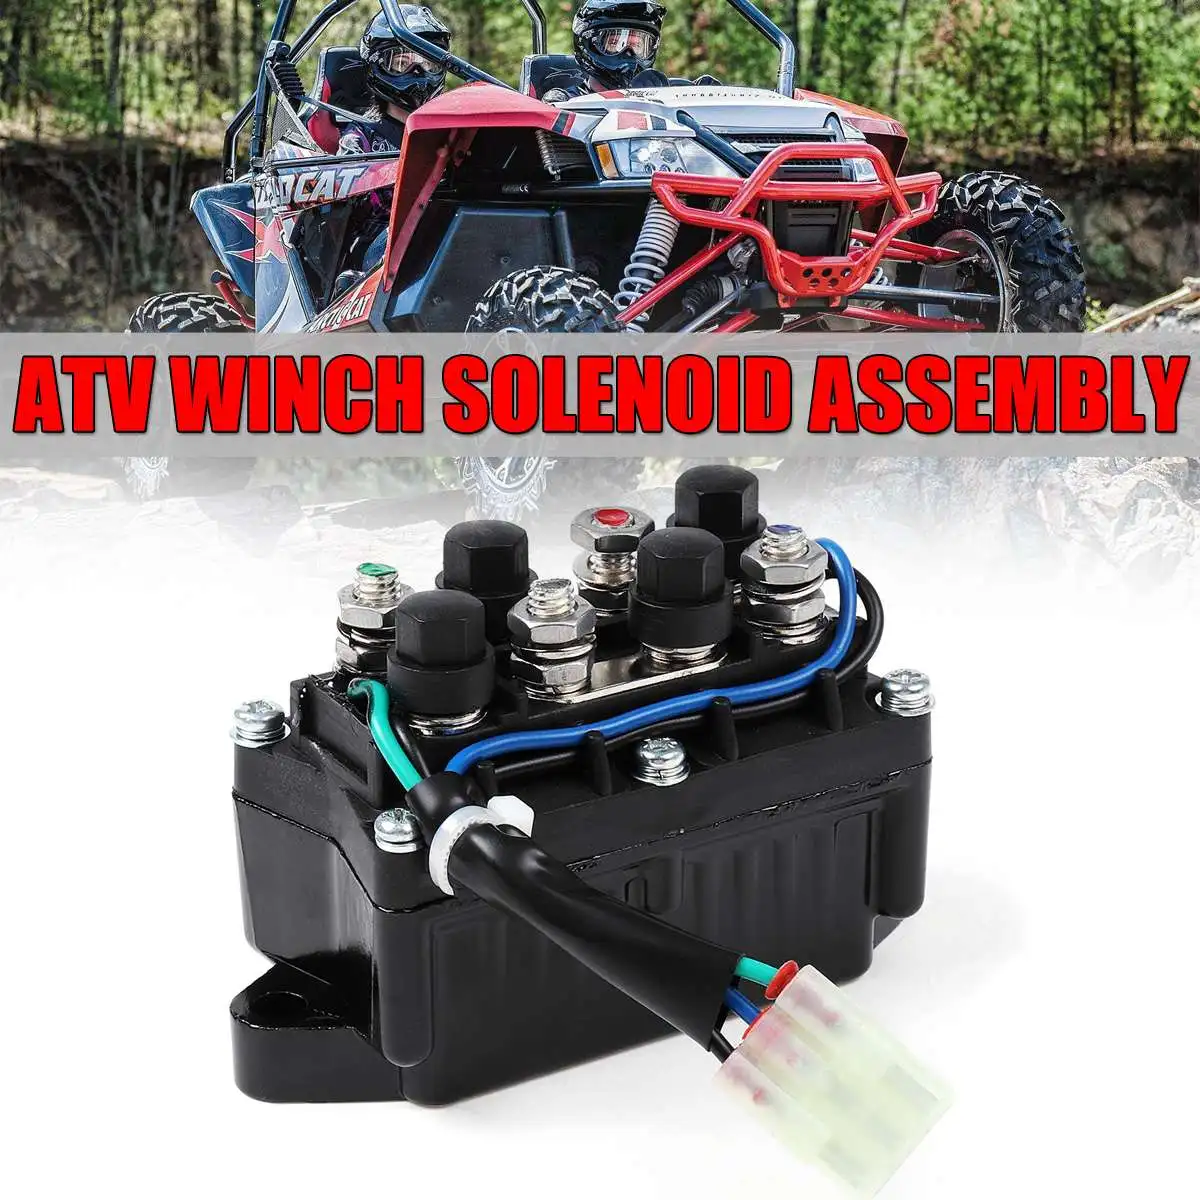 

1pcs ATV Winch Solenoid Assembly For Arctic Cat 0409-066 New 6639-894 1436-066 1436-805 0436-700 1436-187